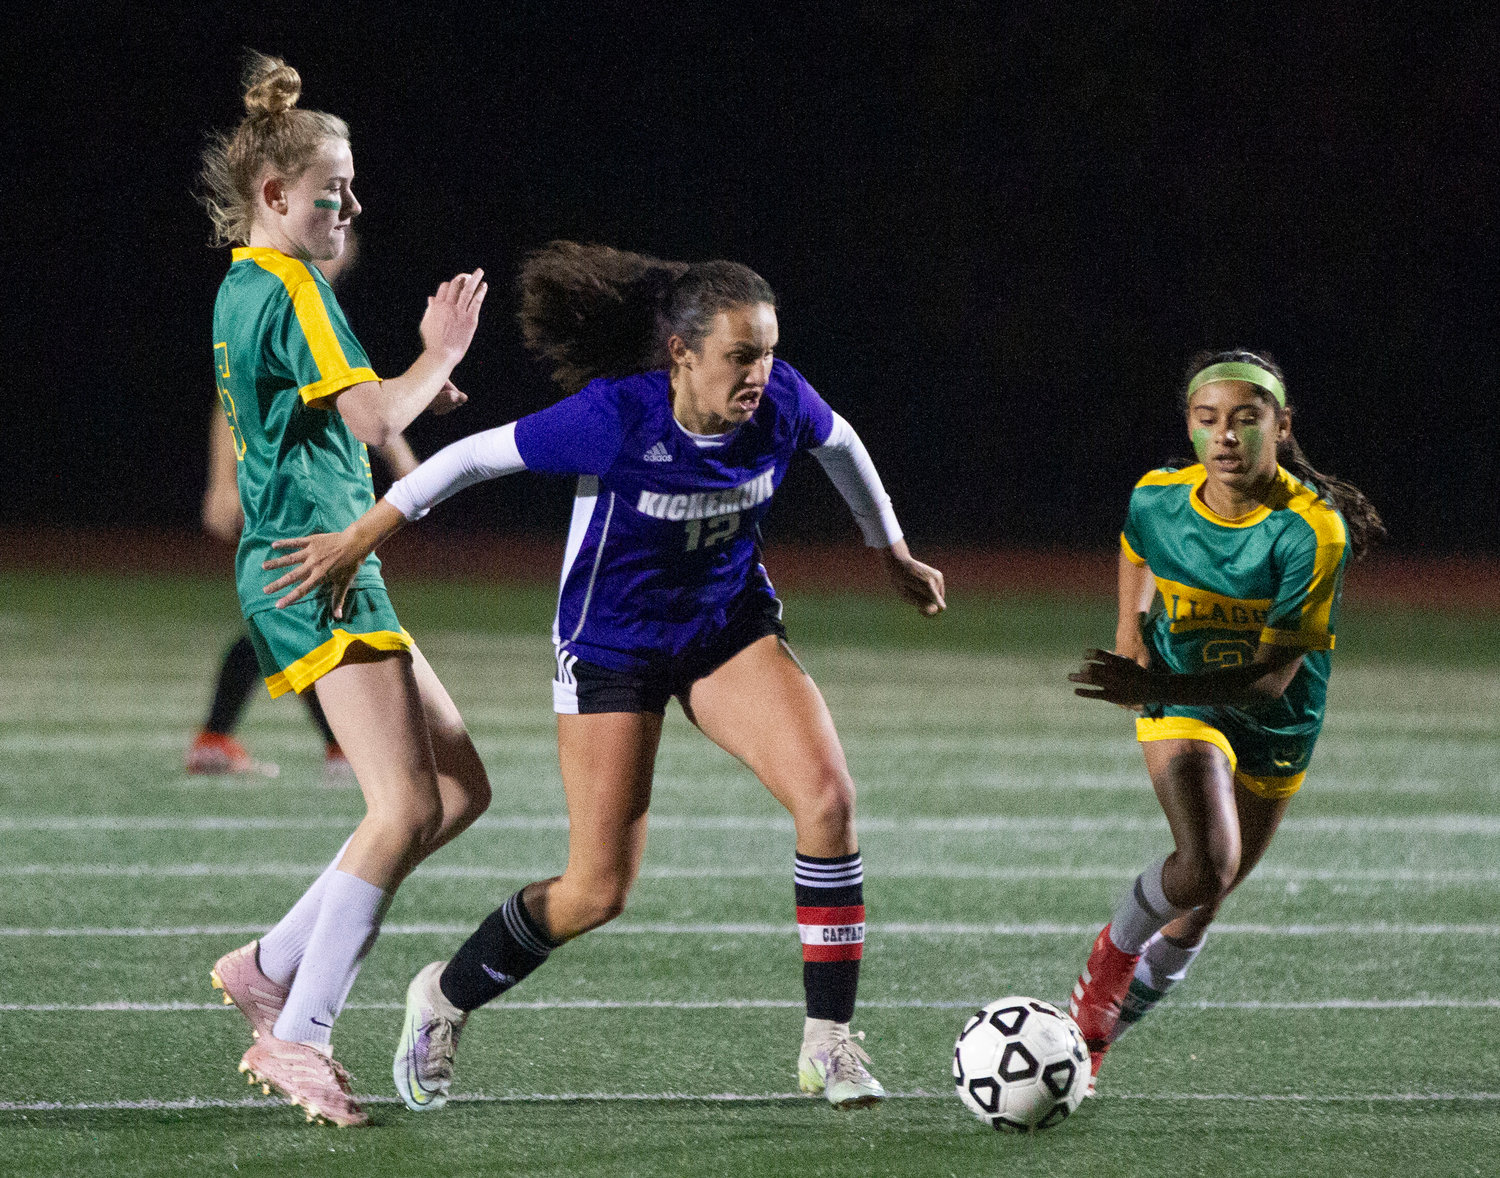 Emma Goglia dribbles between two Gallagher defenders during a Huskies attack.